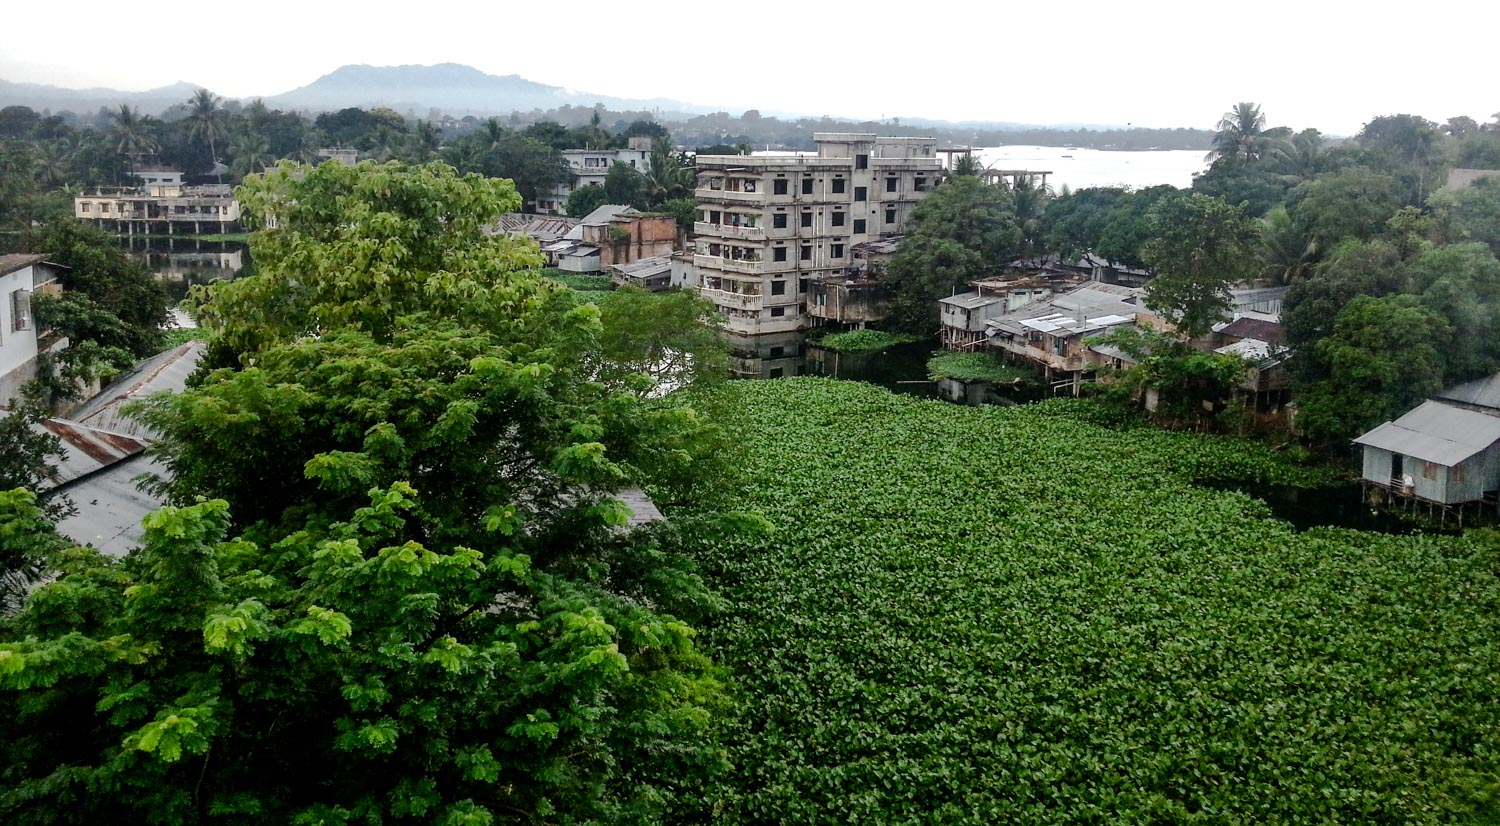 My view from my hotel room in Rangamati